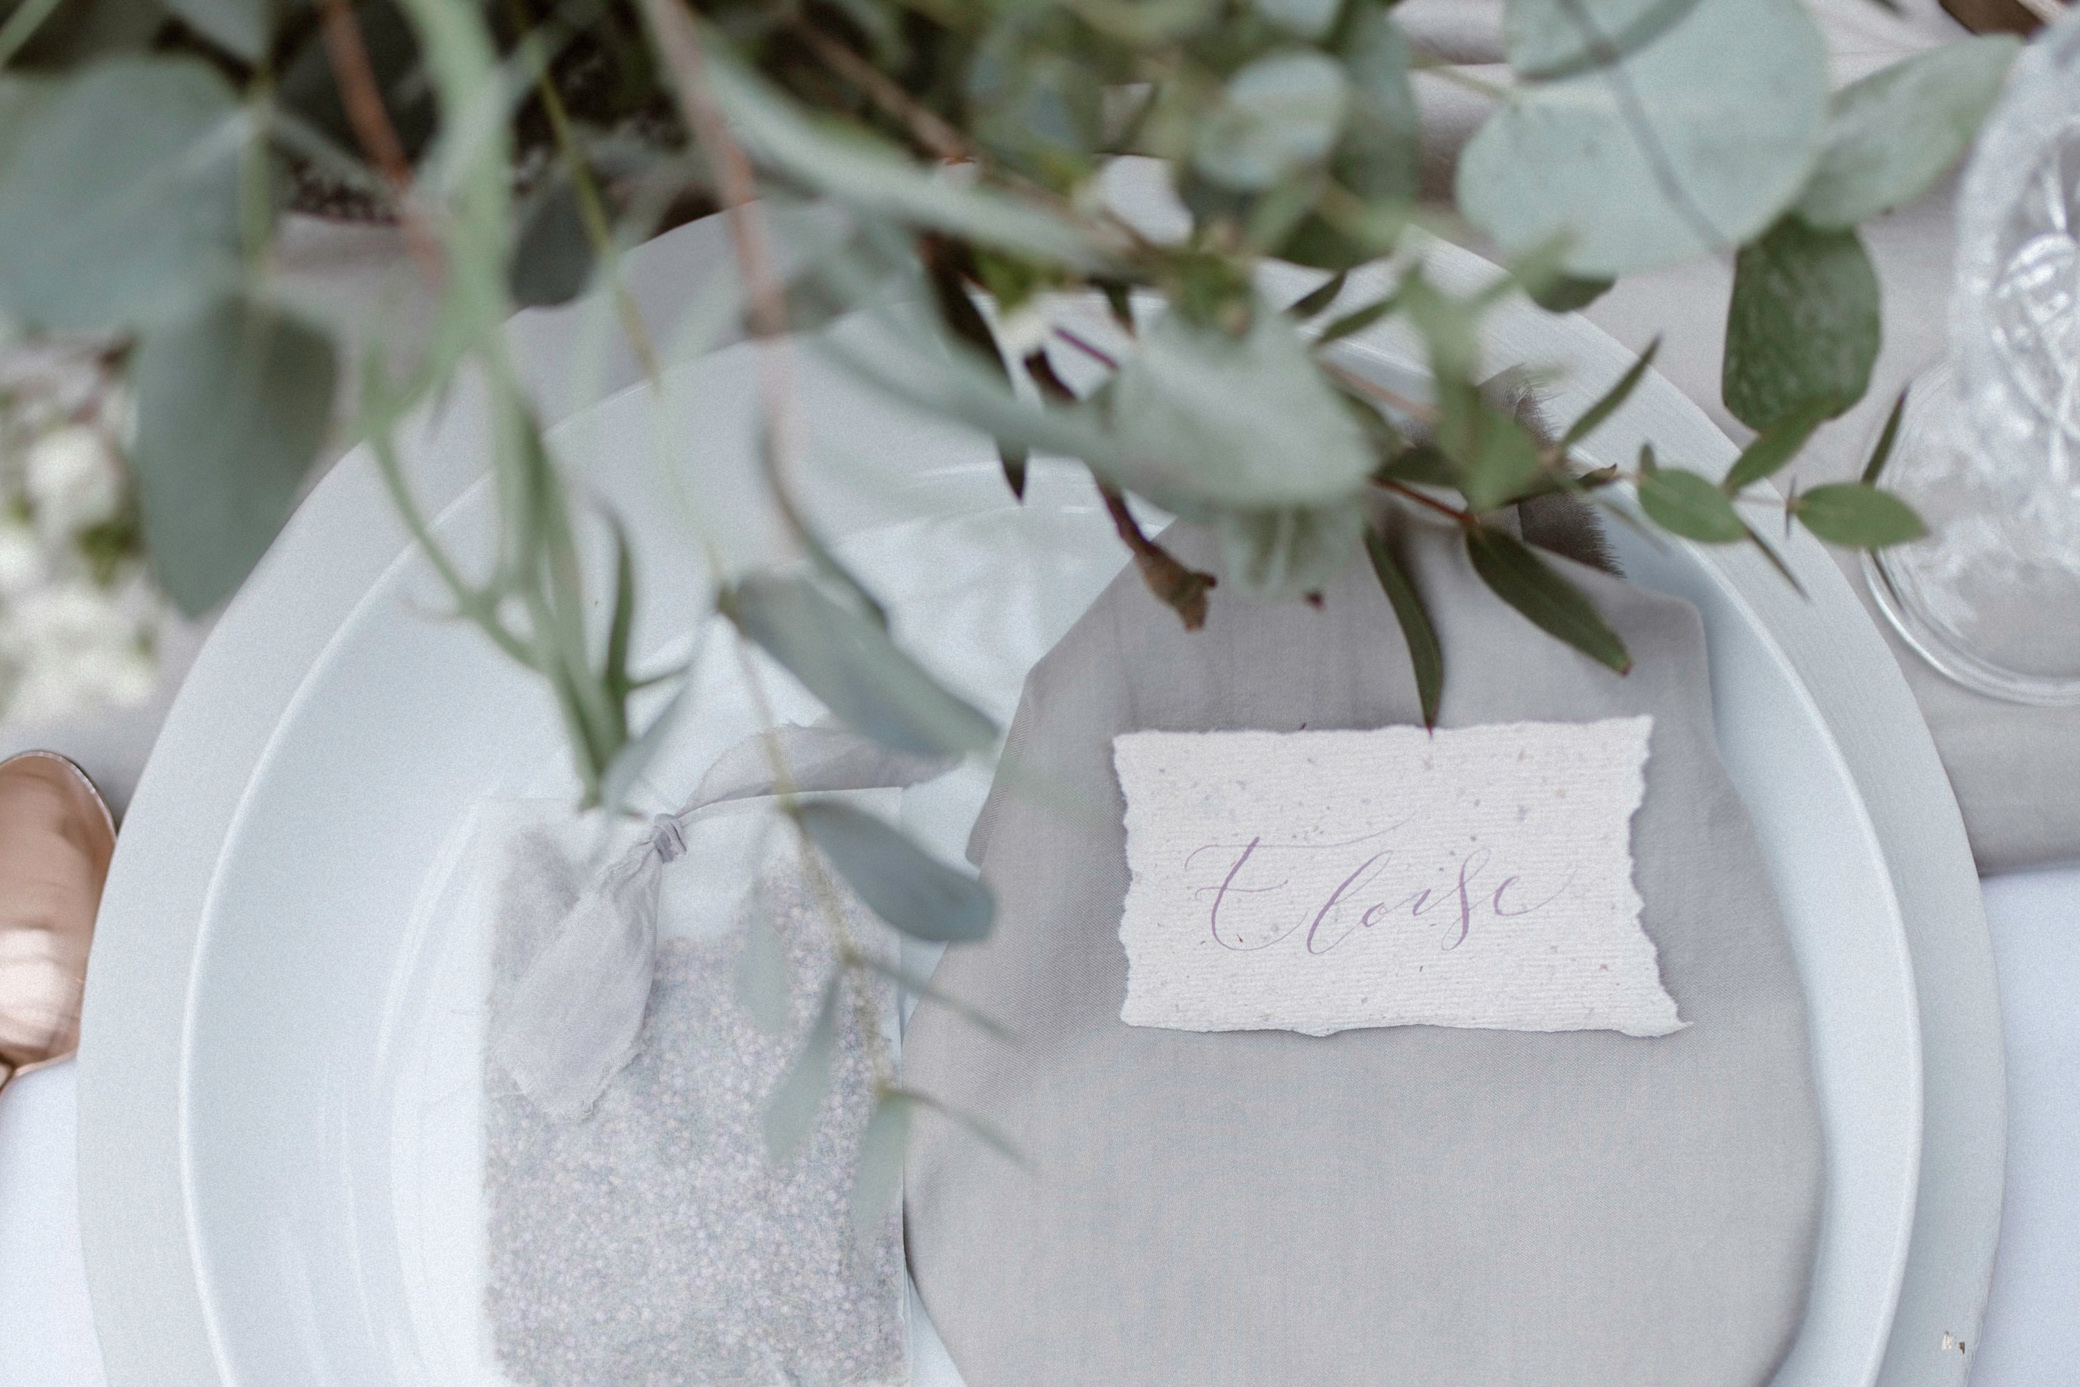 an elegant wedding place setting with a napkin and torn edge recycled calligraphy name card. Eucalyptus sprigs hang over the top of the plates, which are photographed from above